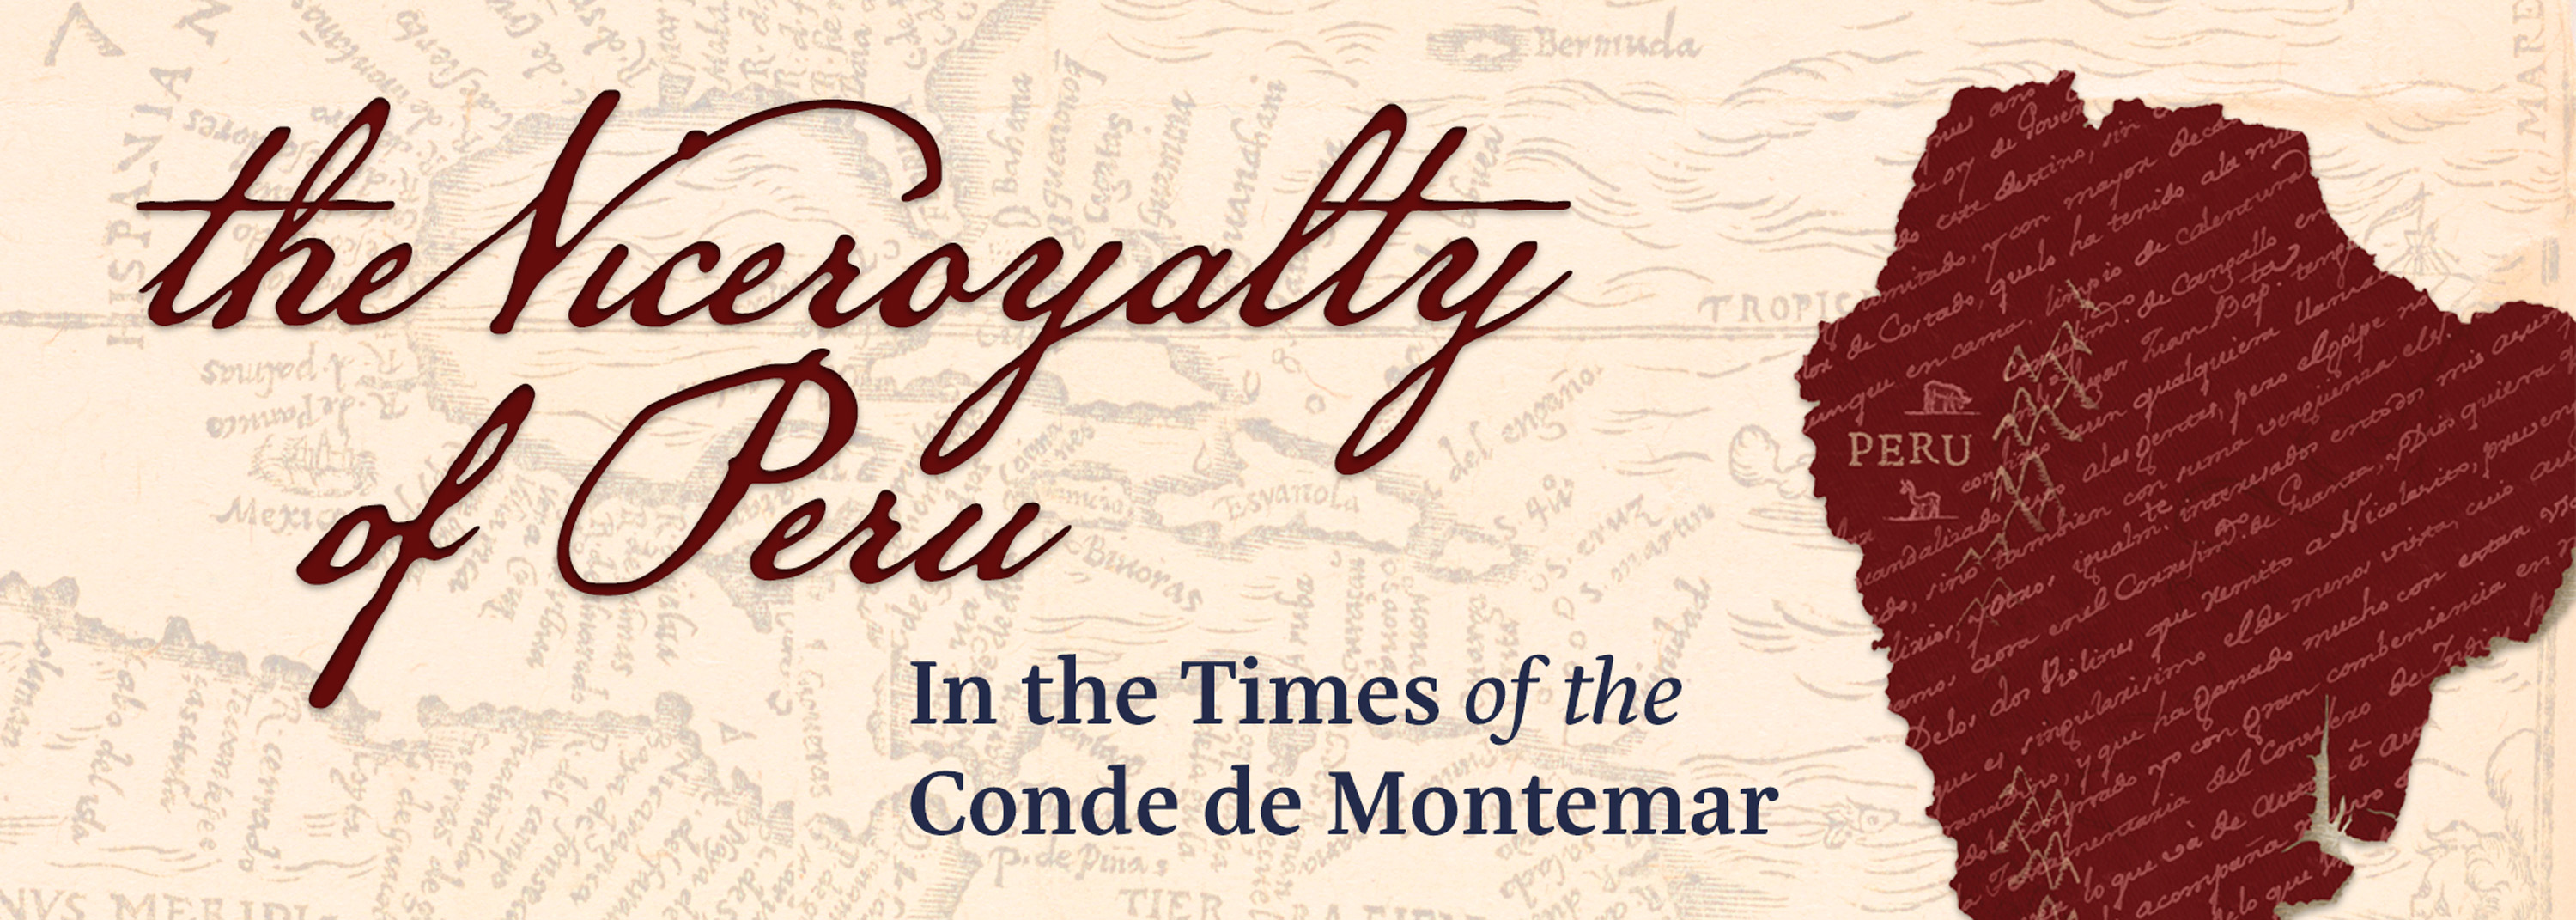 The Viceroyalty of Peru in the Times of the Conde de Montemar